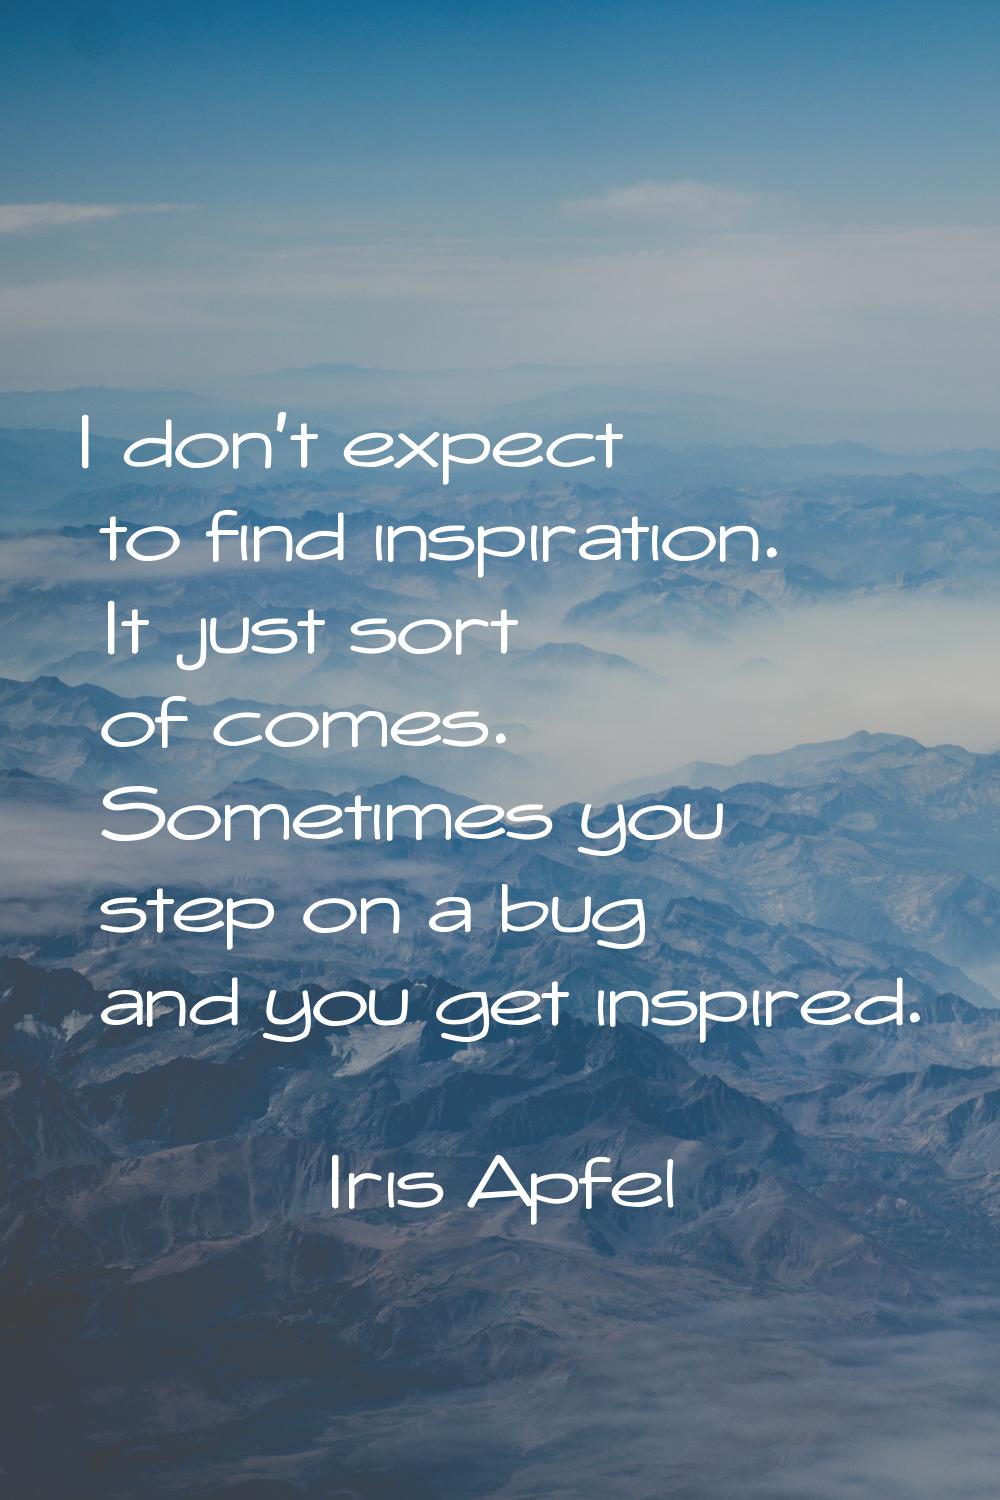 I don't expect to find inspiration. It just sort of comes. Sometimes you step on a bug and you get 